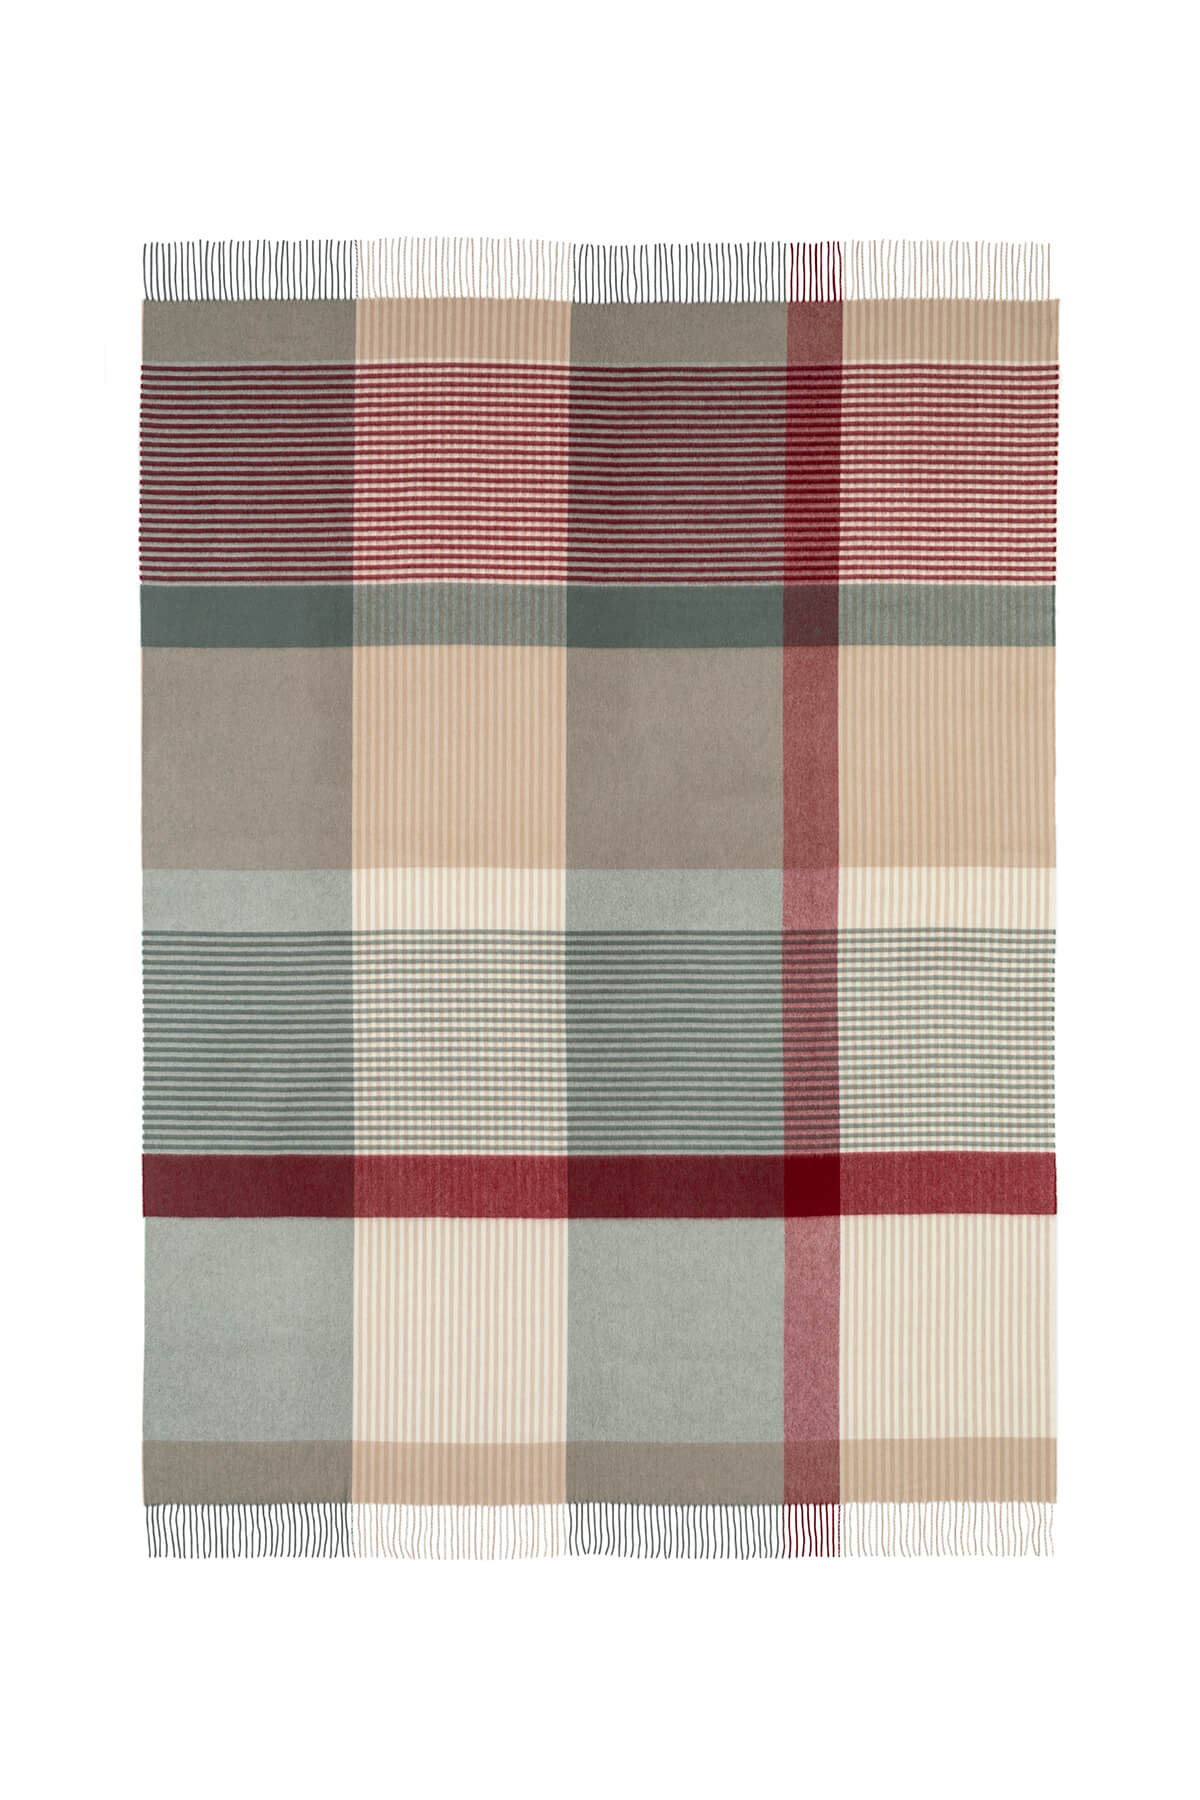 Johnstons of Elgin Red, Cream, and Grey Check Cashmere Christmas Blanket lying flat on a white background WA000055RU7450